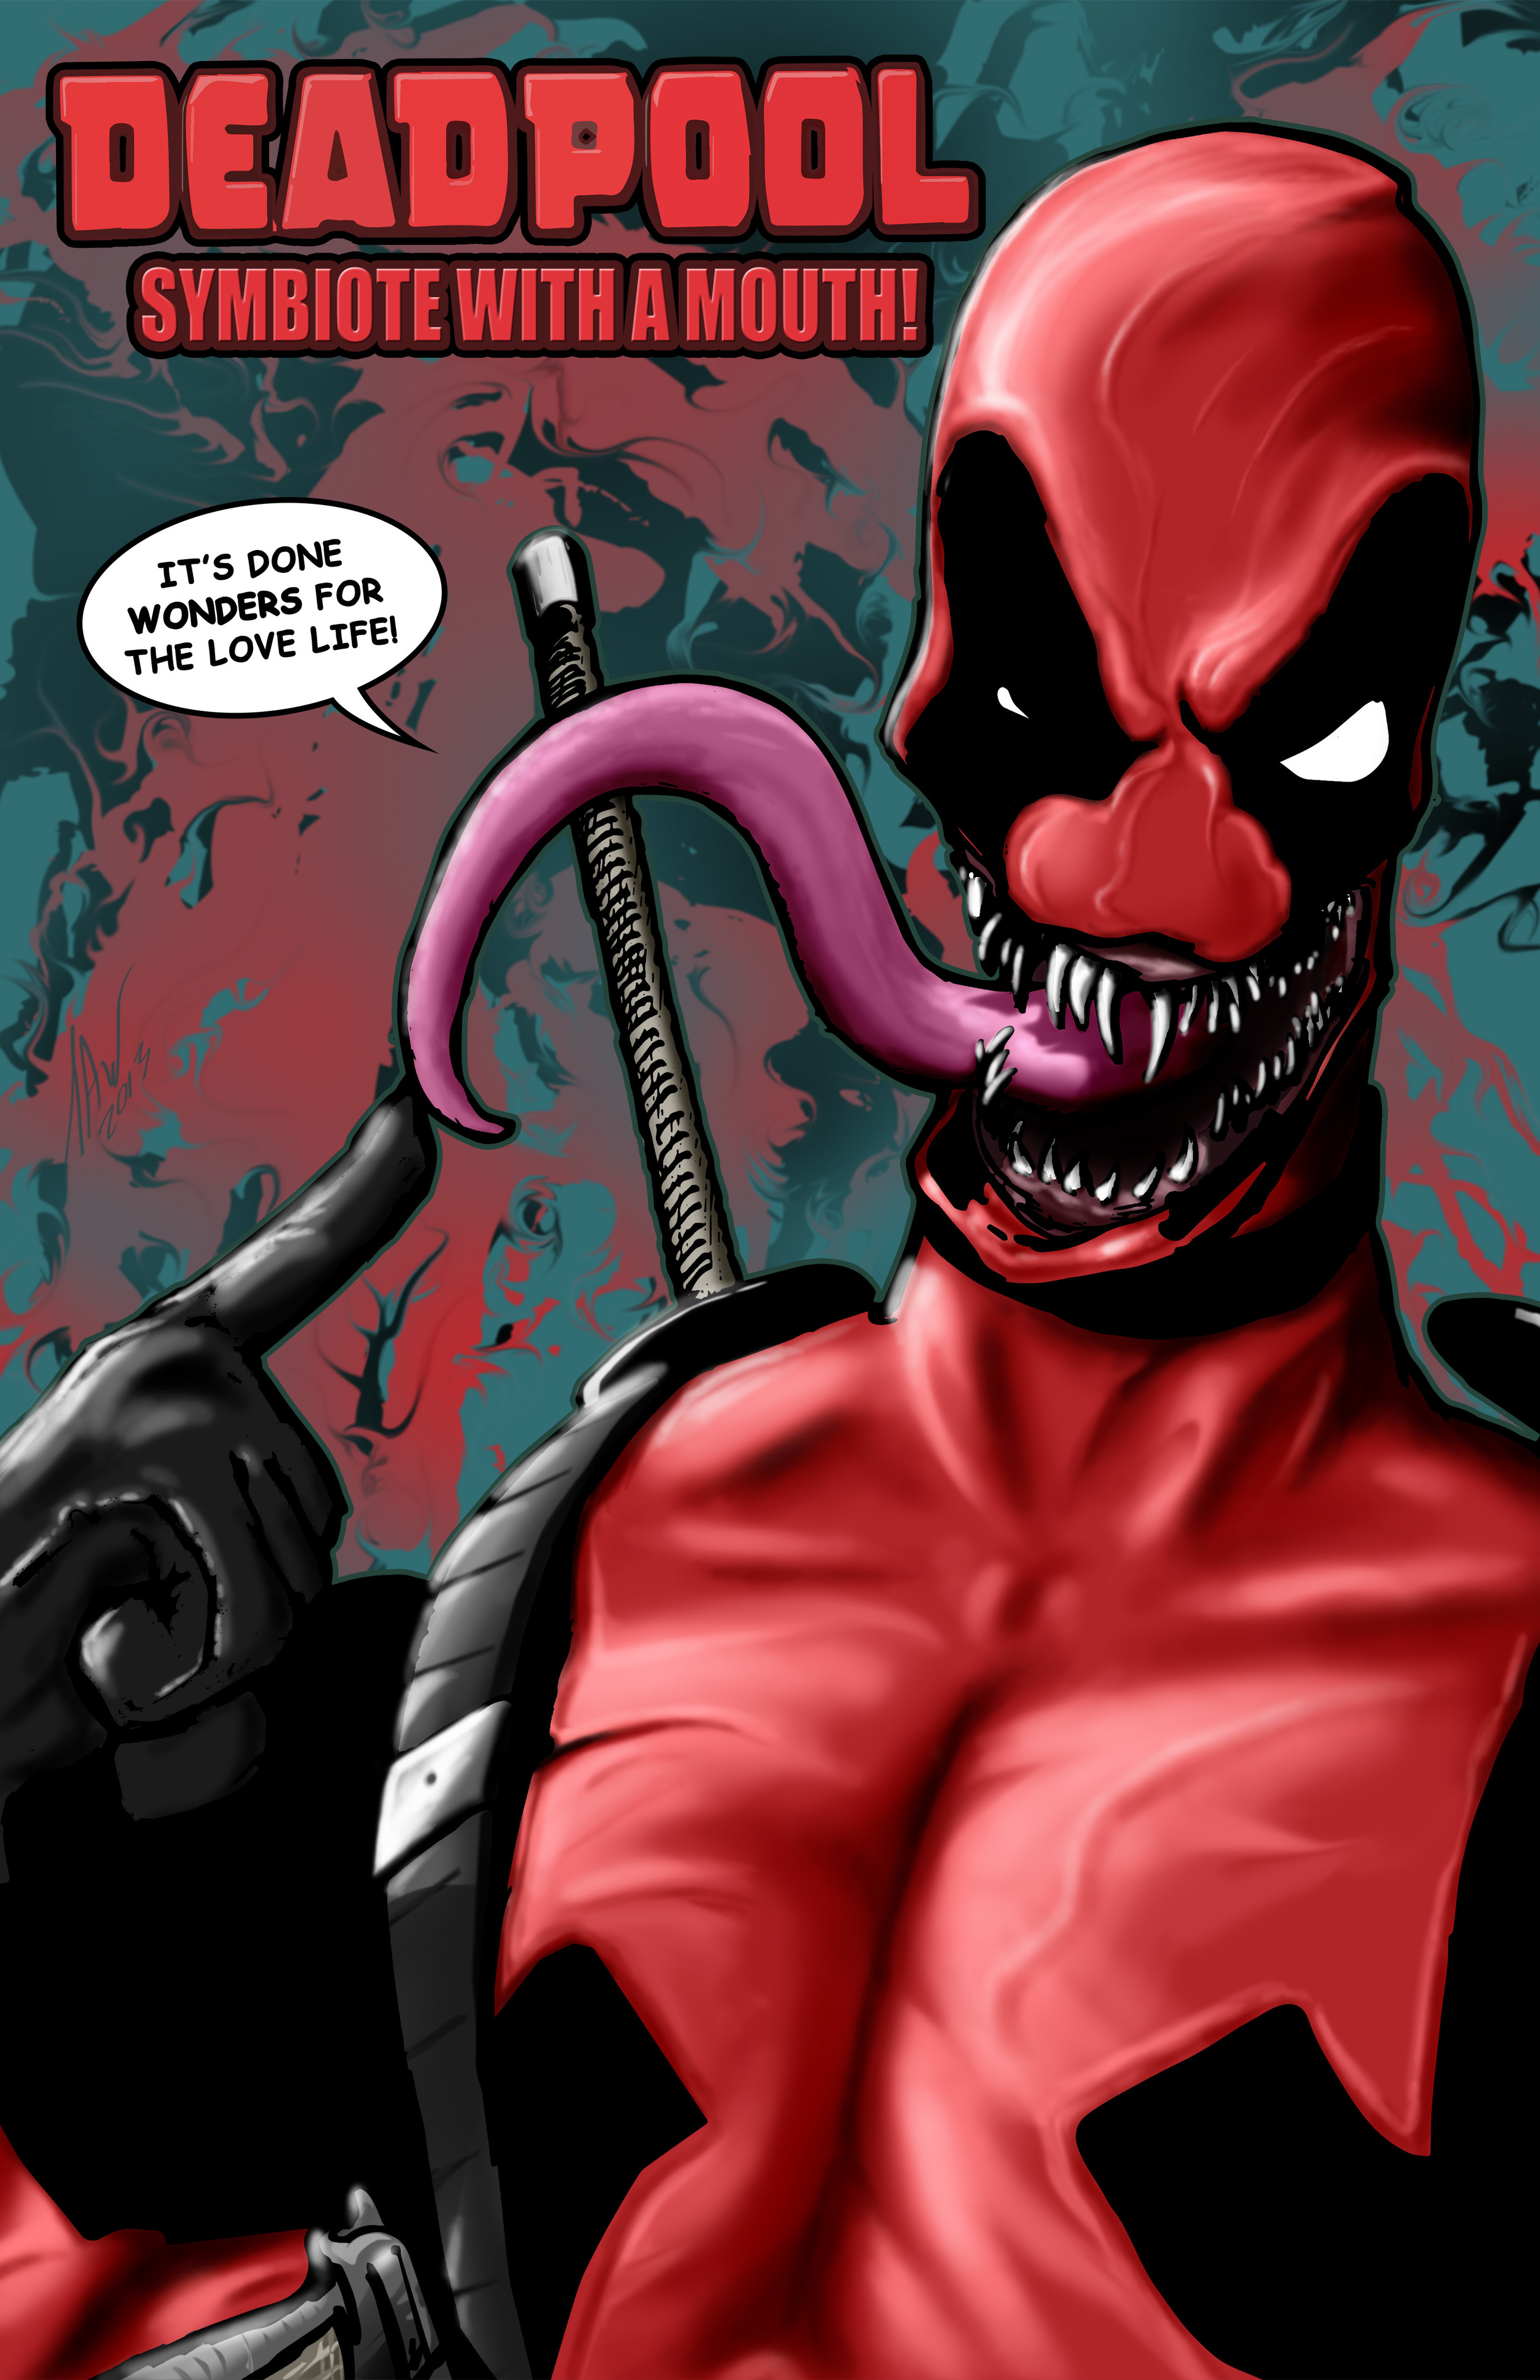 Deadpool-Symbiote with a Mouth 11x17.jpg